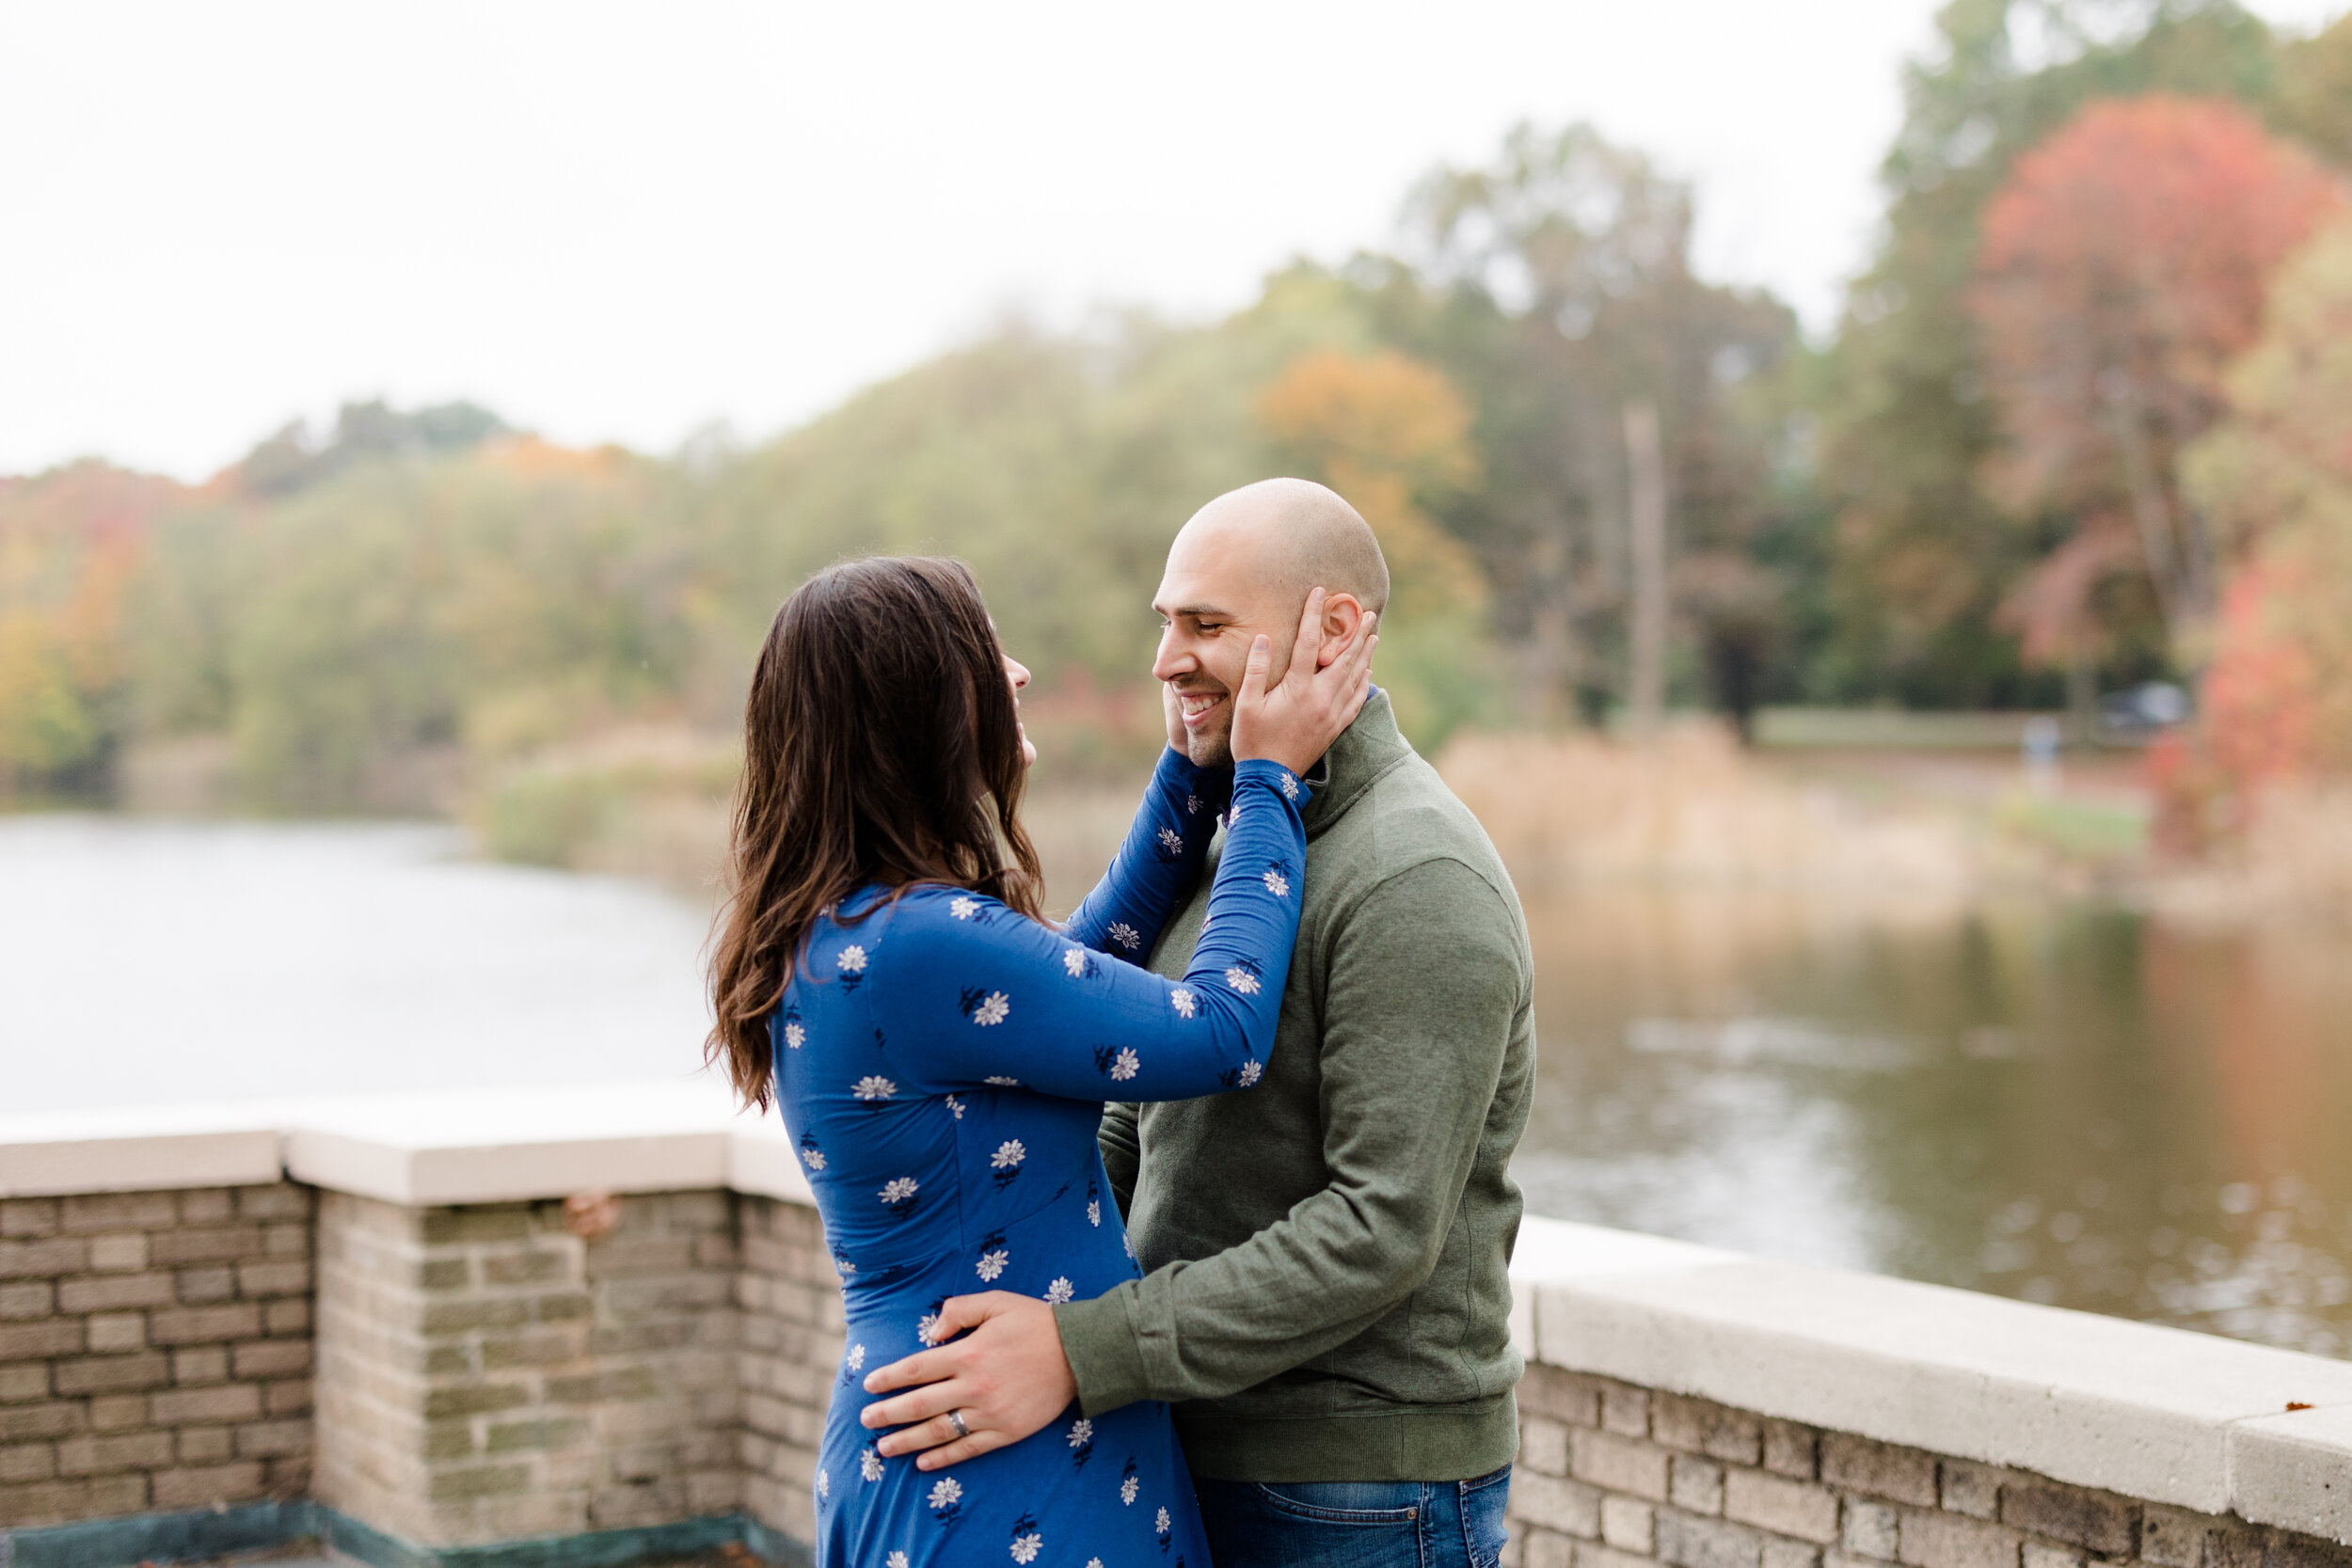 South-Philly-FDR-Park-Fall-Engagement-Session-7.jpg